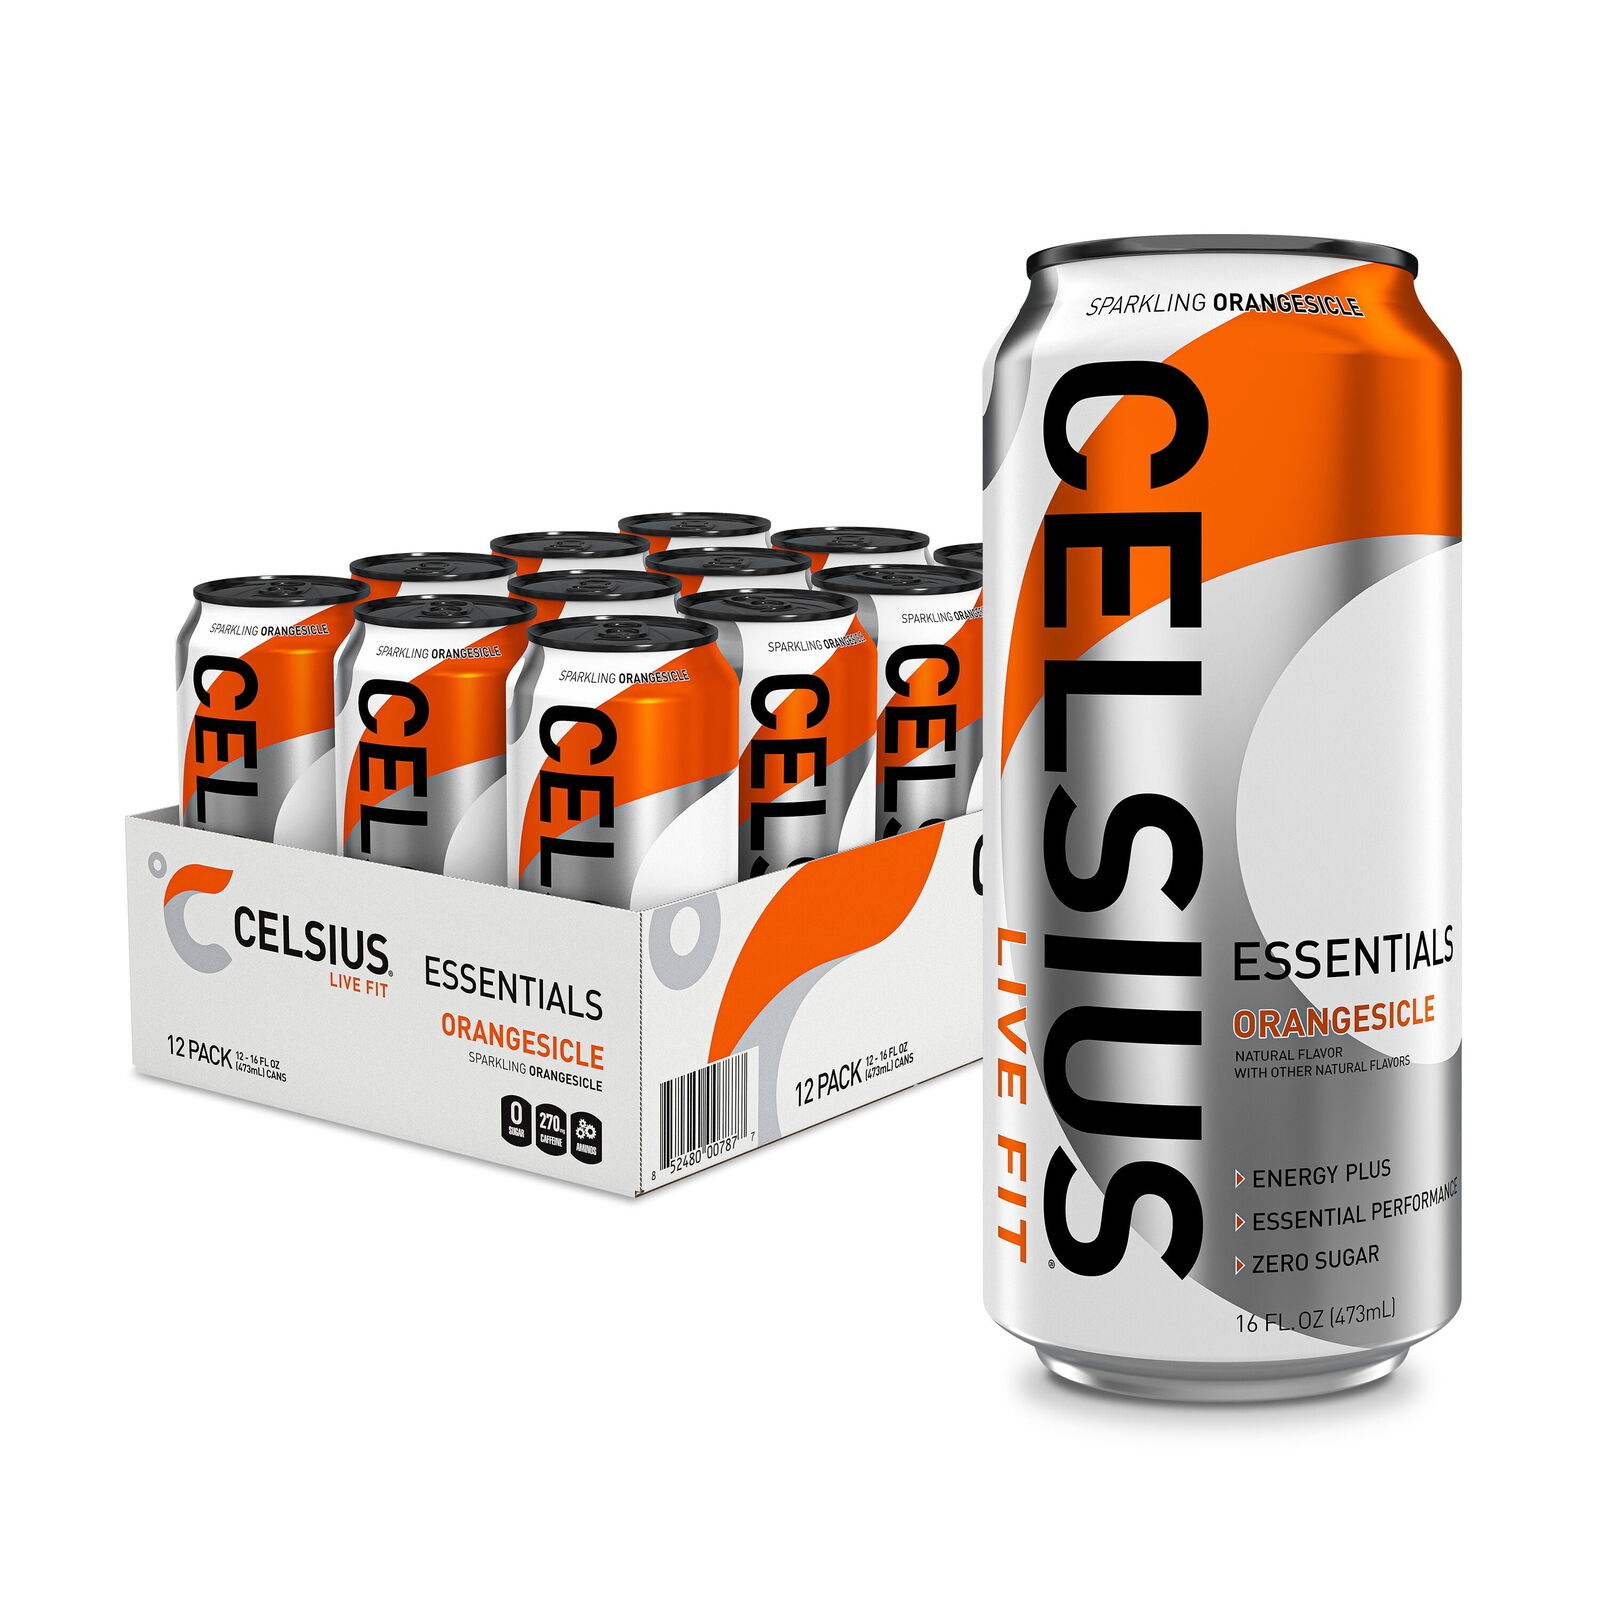 CELSIUS Essentials Sparkling Orangesicle, Functional Performance Energy Drink